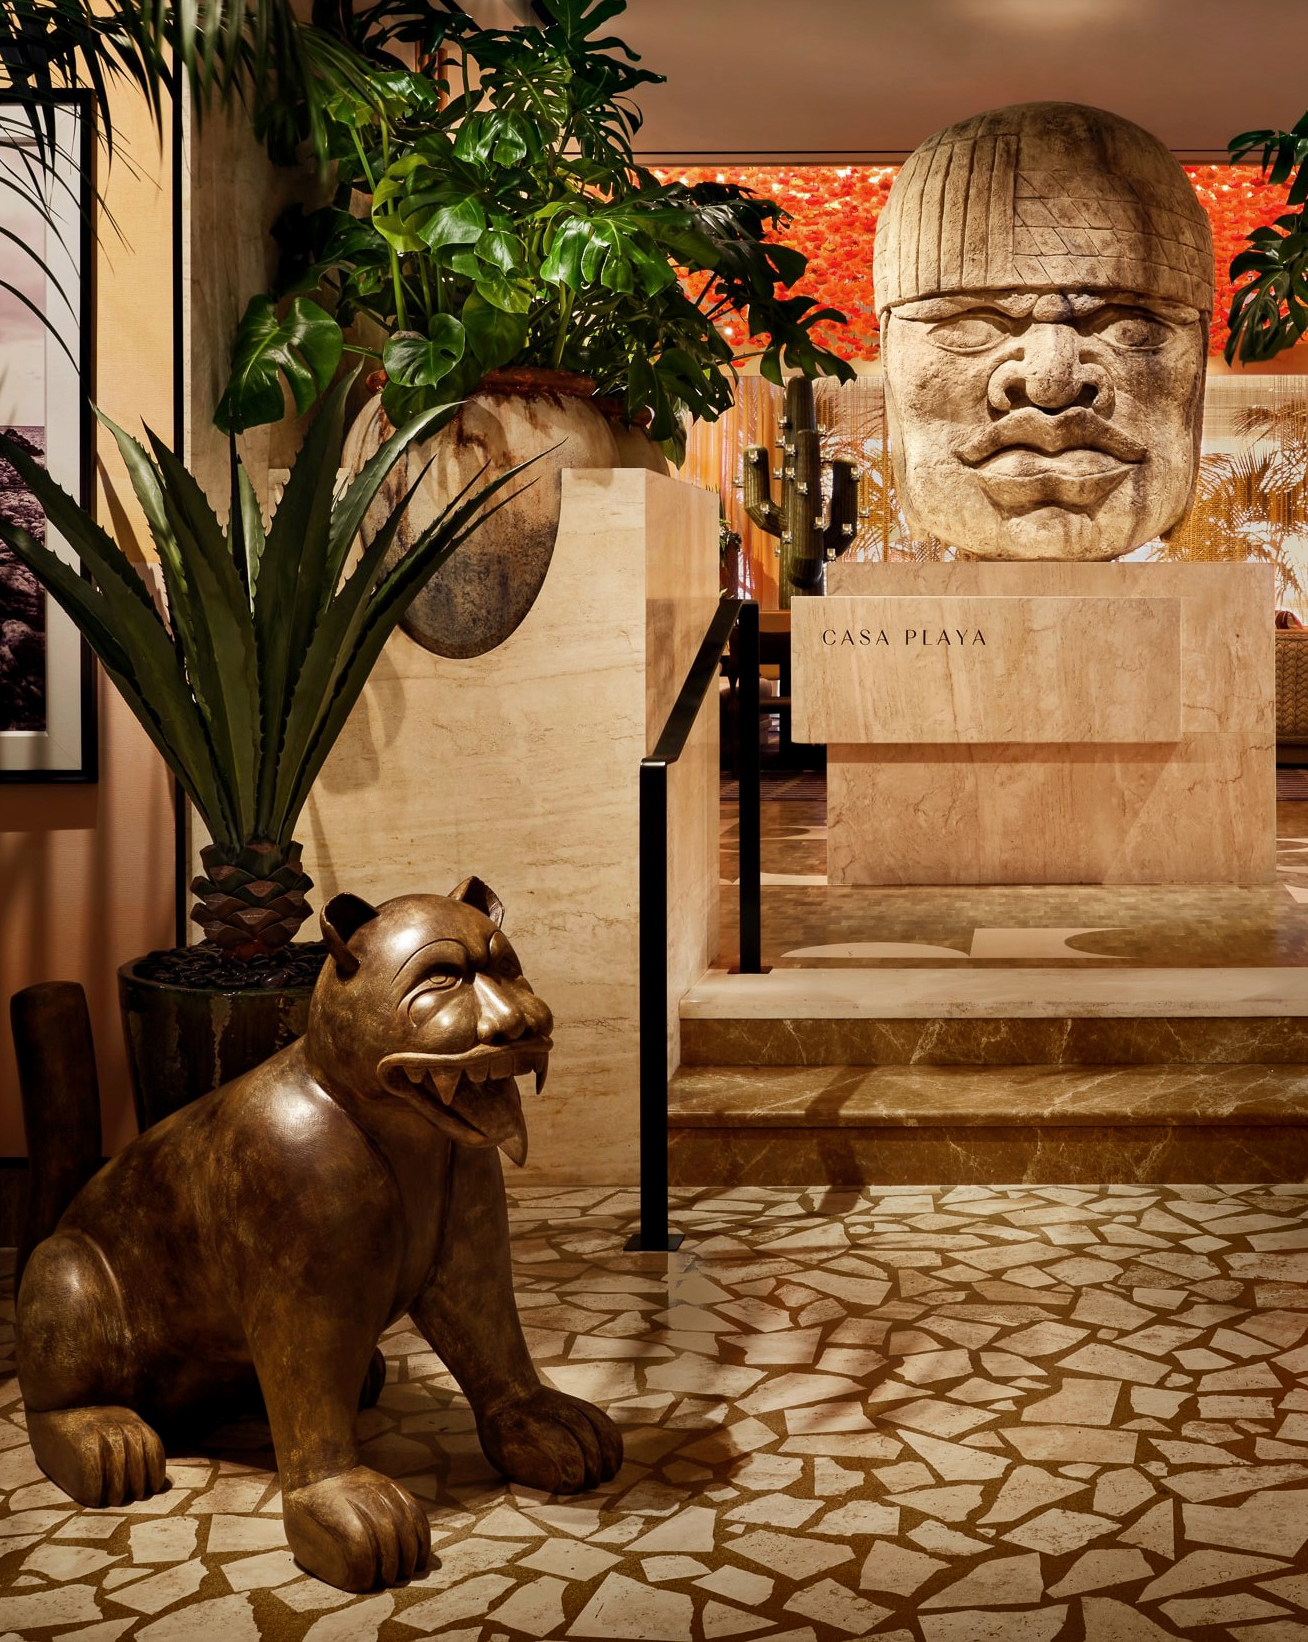 The elegant restaurant foyer of Casa Playa decorated in marble and stone, with sculptures and tropical plants.